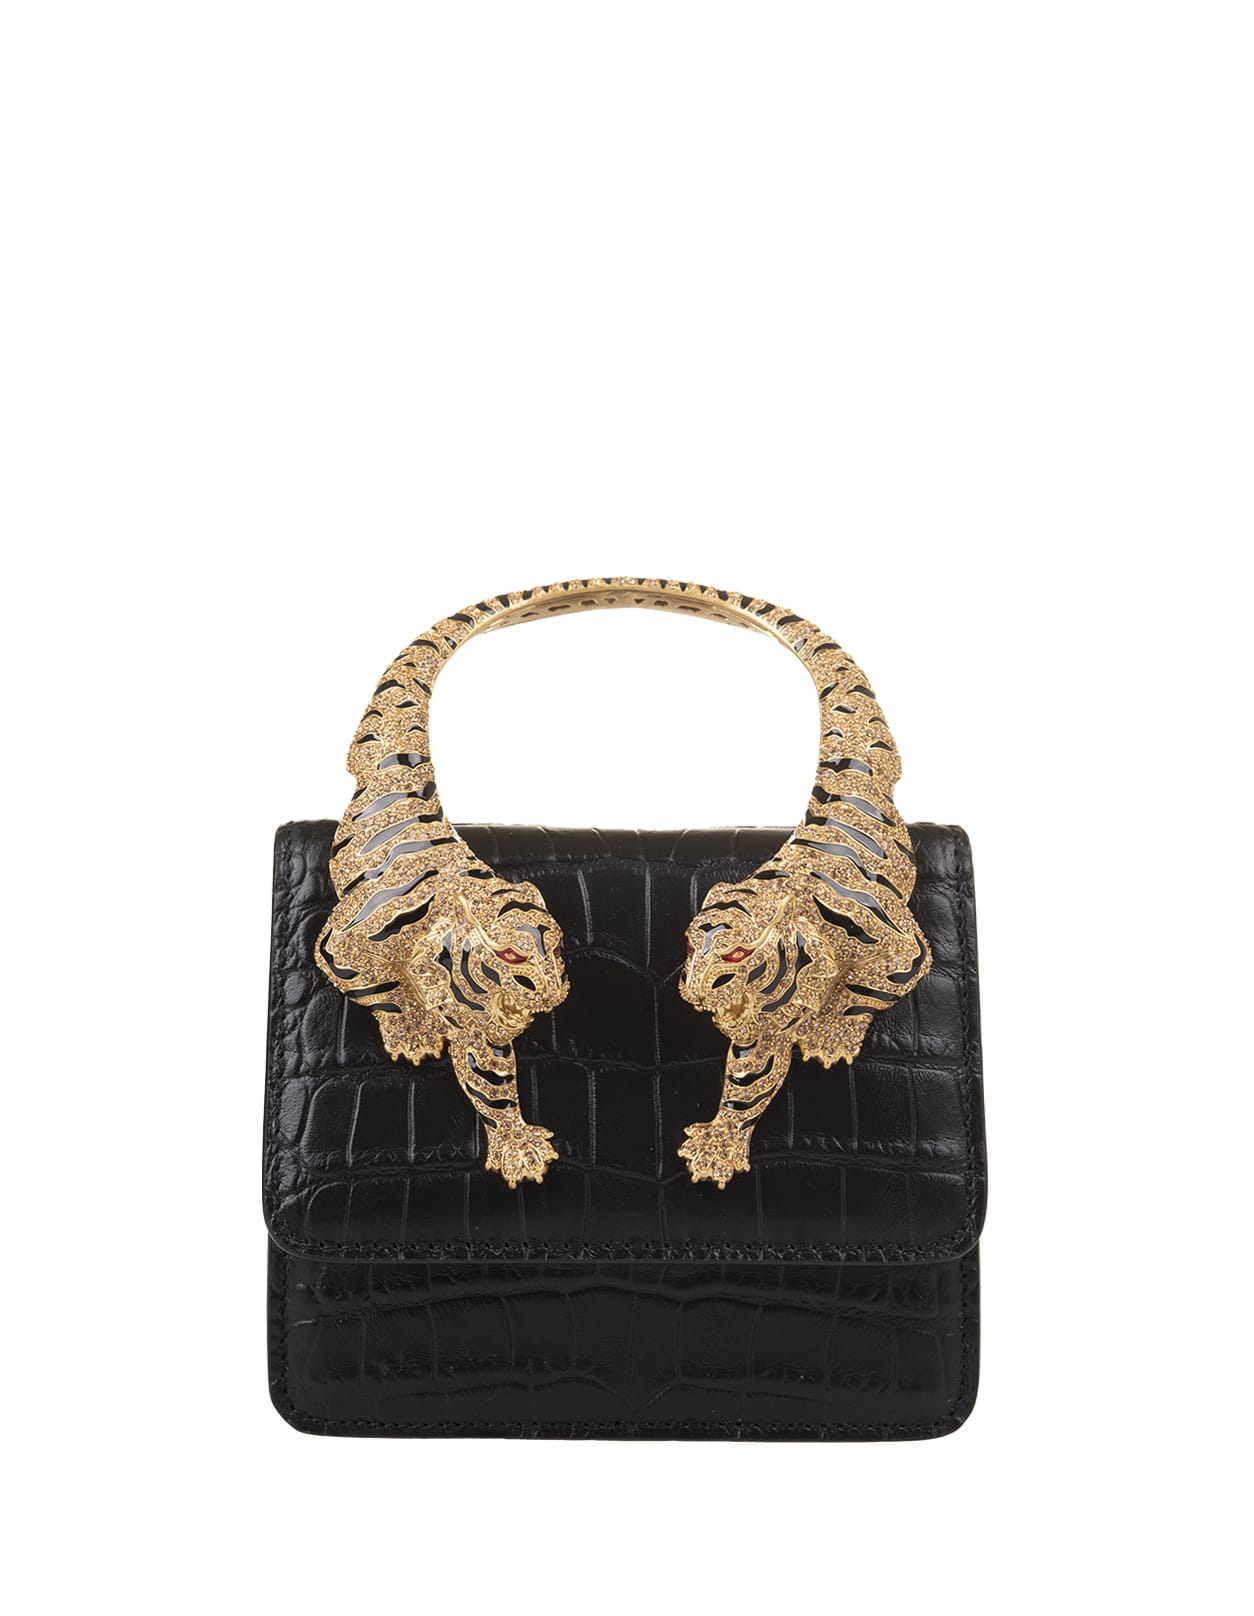 Roberto Cavalli Black Small Roar Shoulder Bag With Jewelled Tigers In Black/gold